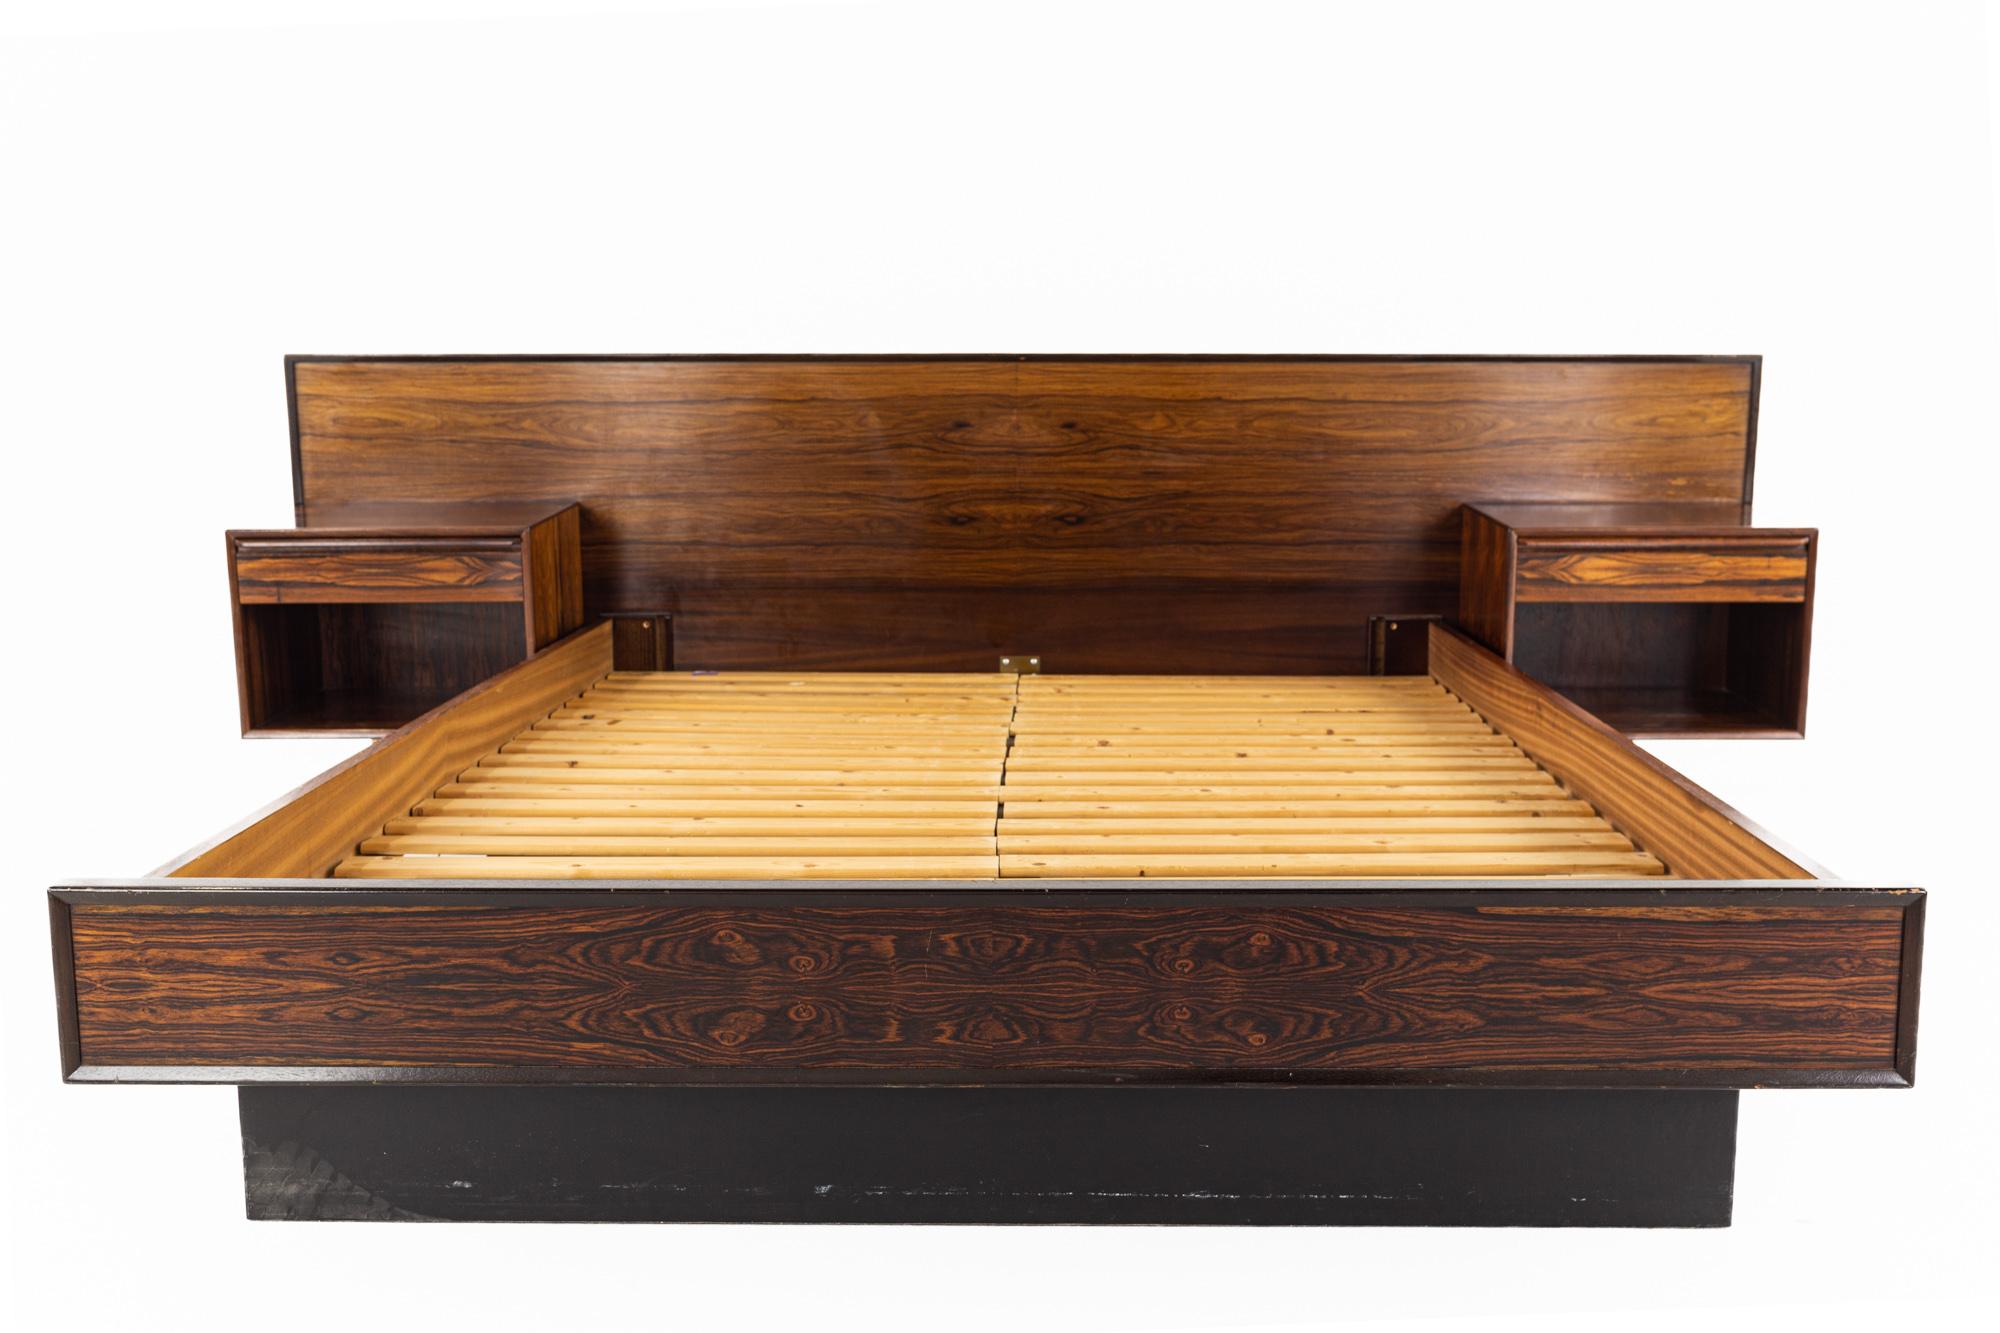 Mid Century Rosewood King Platform Bed with Floating Nightstands

The bed measures: 107 wide x 83 deep x 32 inches high

All pieces of furniture can be had in what we call restored vintage condition. That means the piece is restored upon